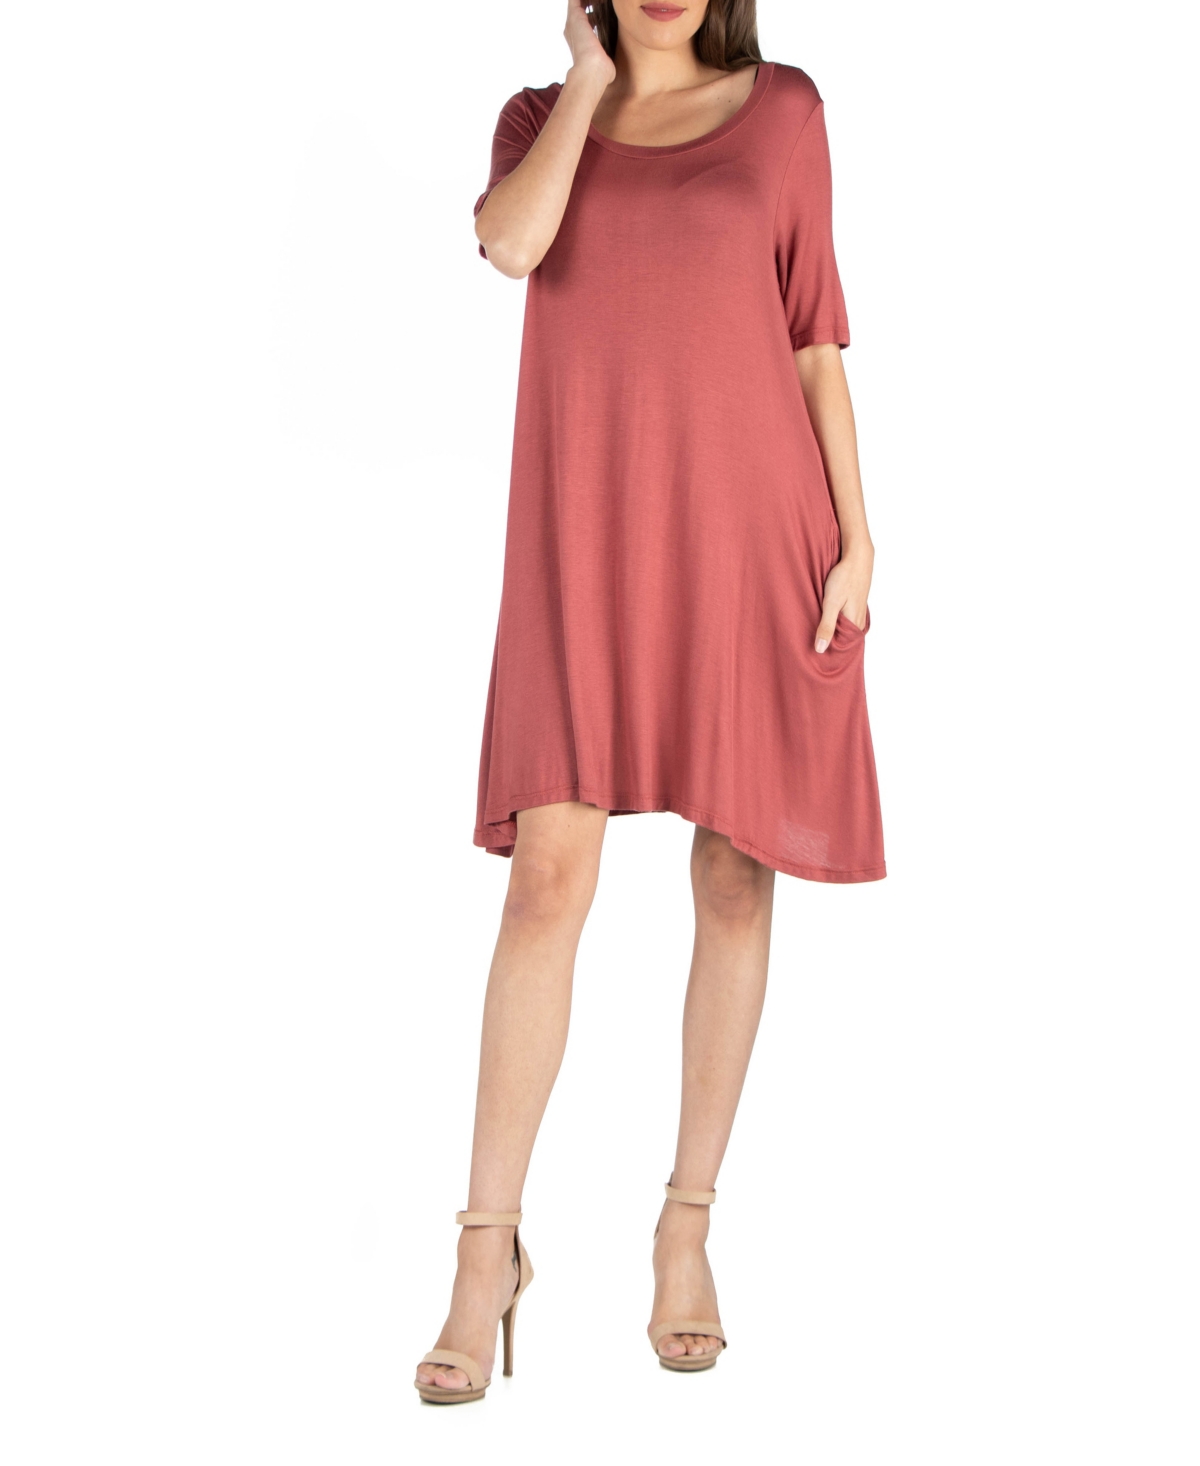 Soft Flare T-Shirt Dress with Pocket Detail - Cinnamon